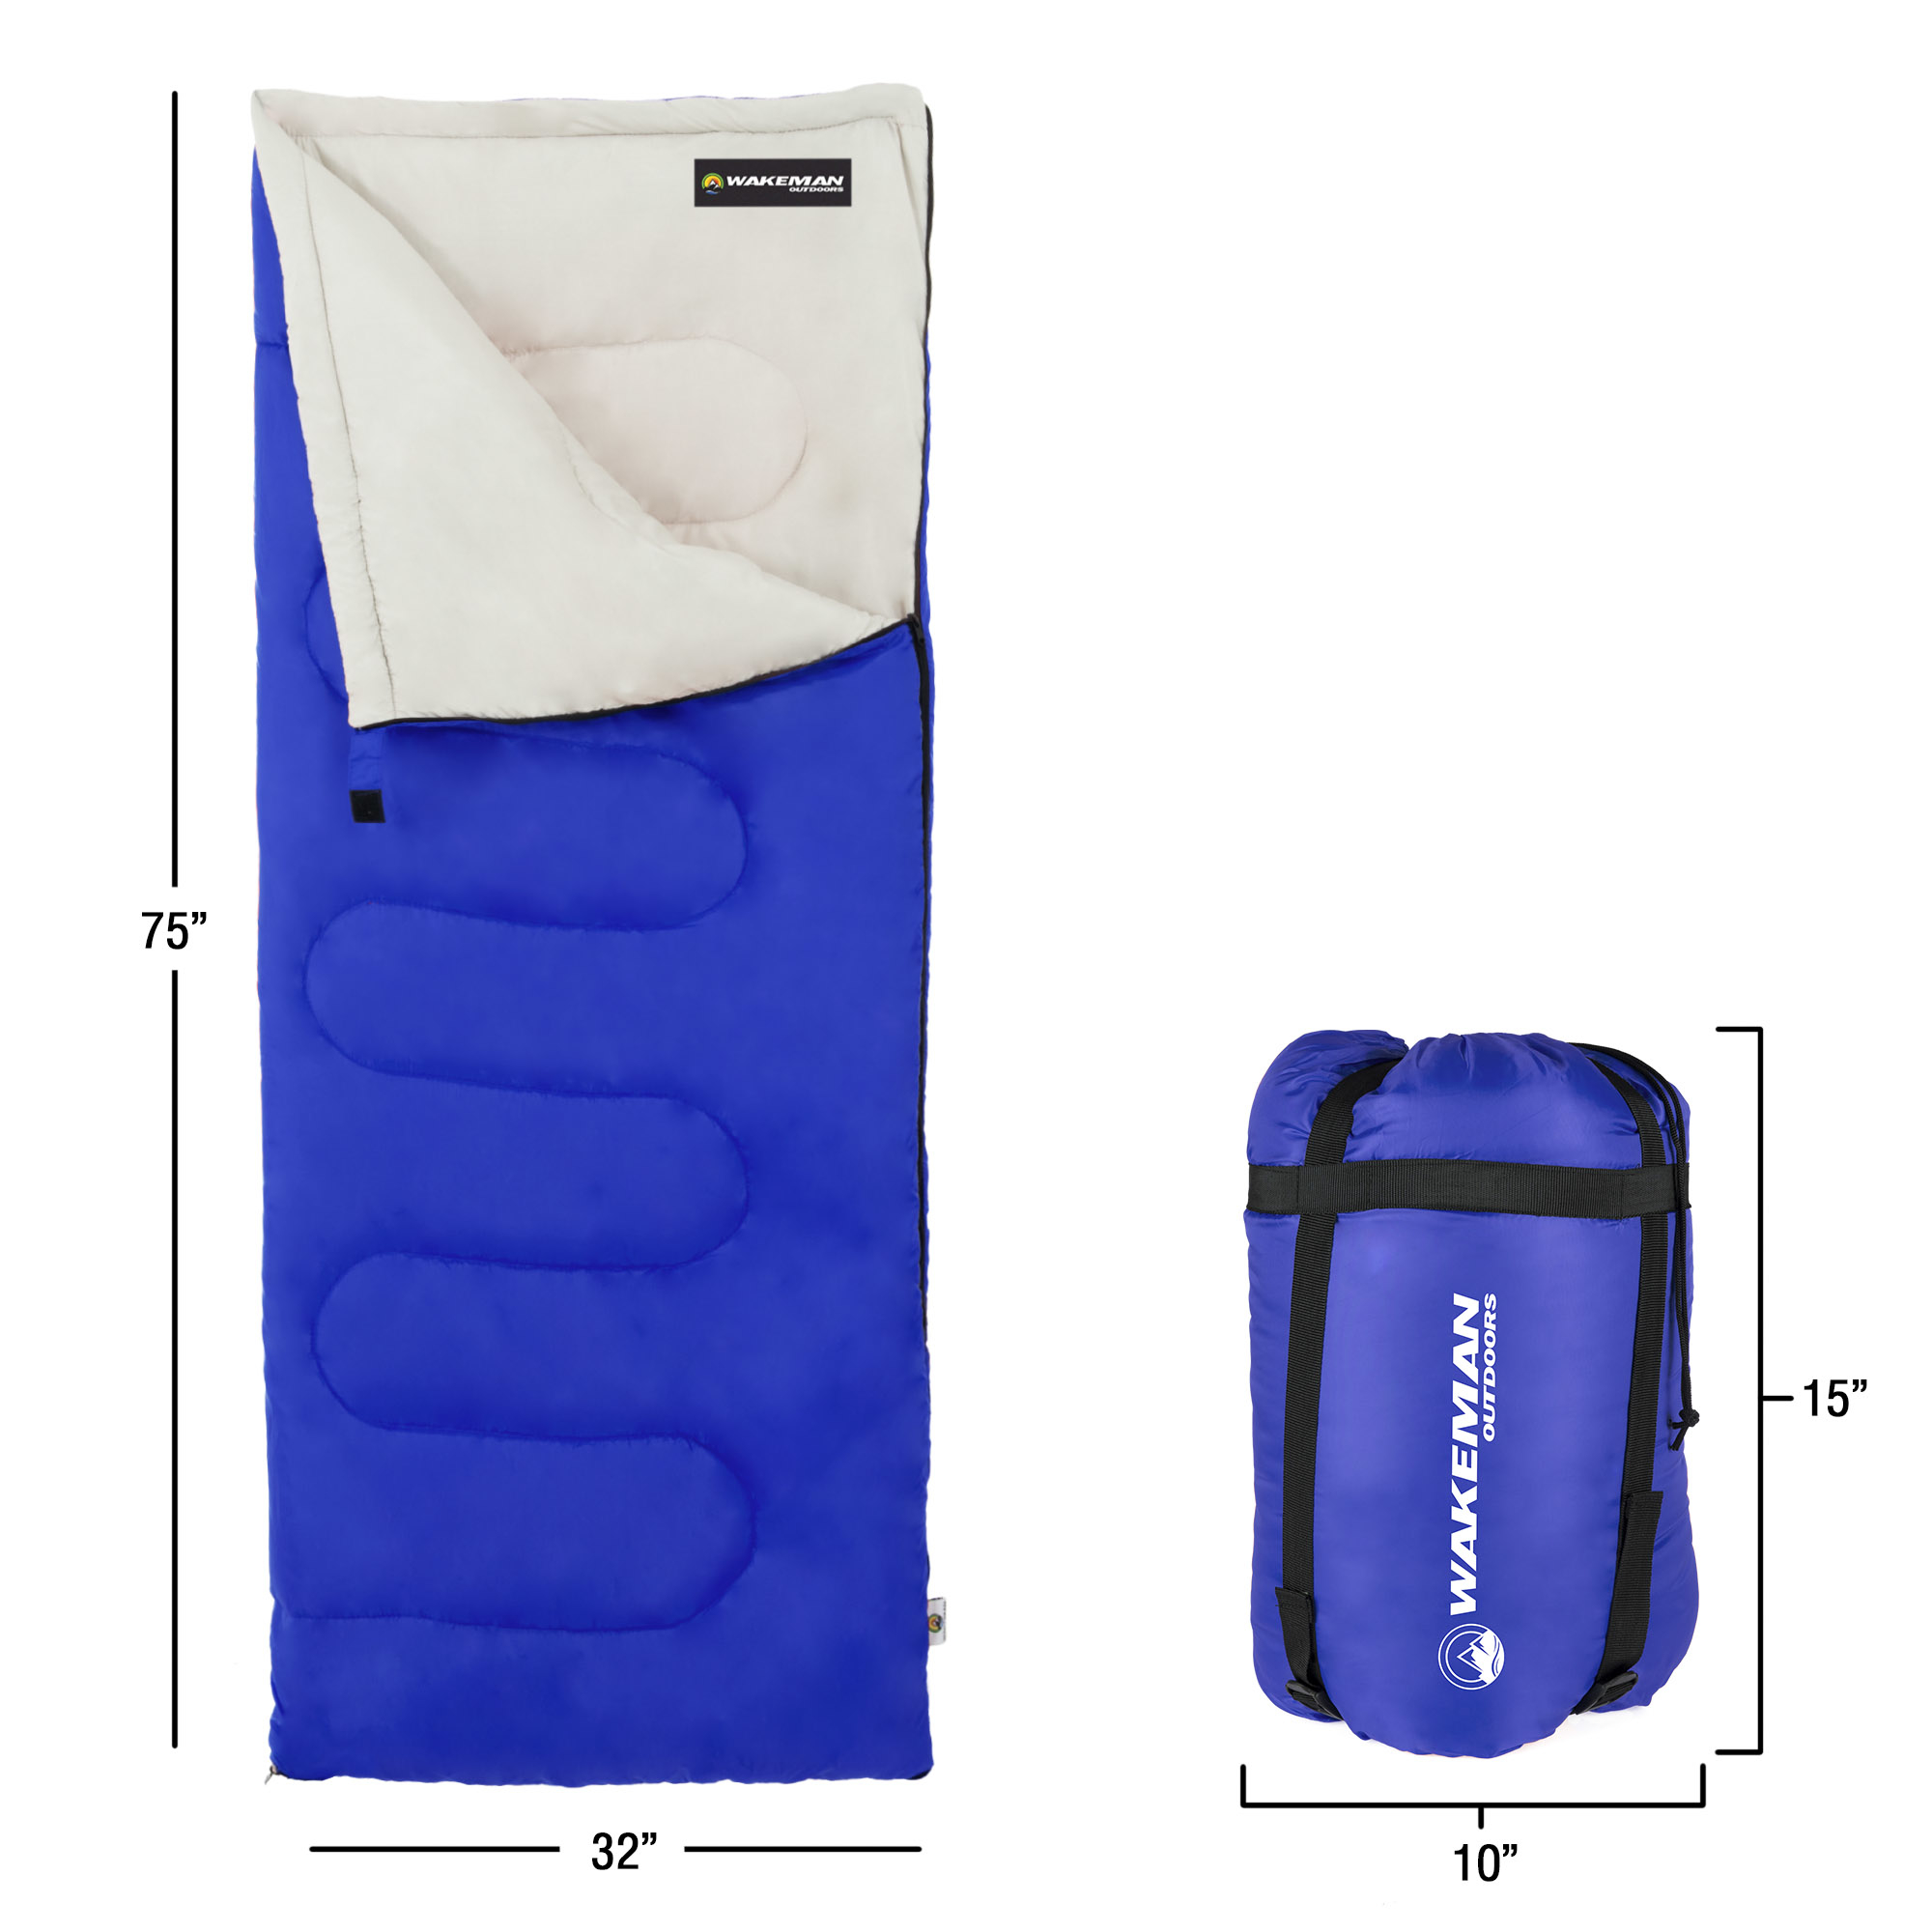 Sleeping Bag 3 Season For Adults Or Kids 75 Inches For Camping Or Travel Or Festivals - Blue